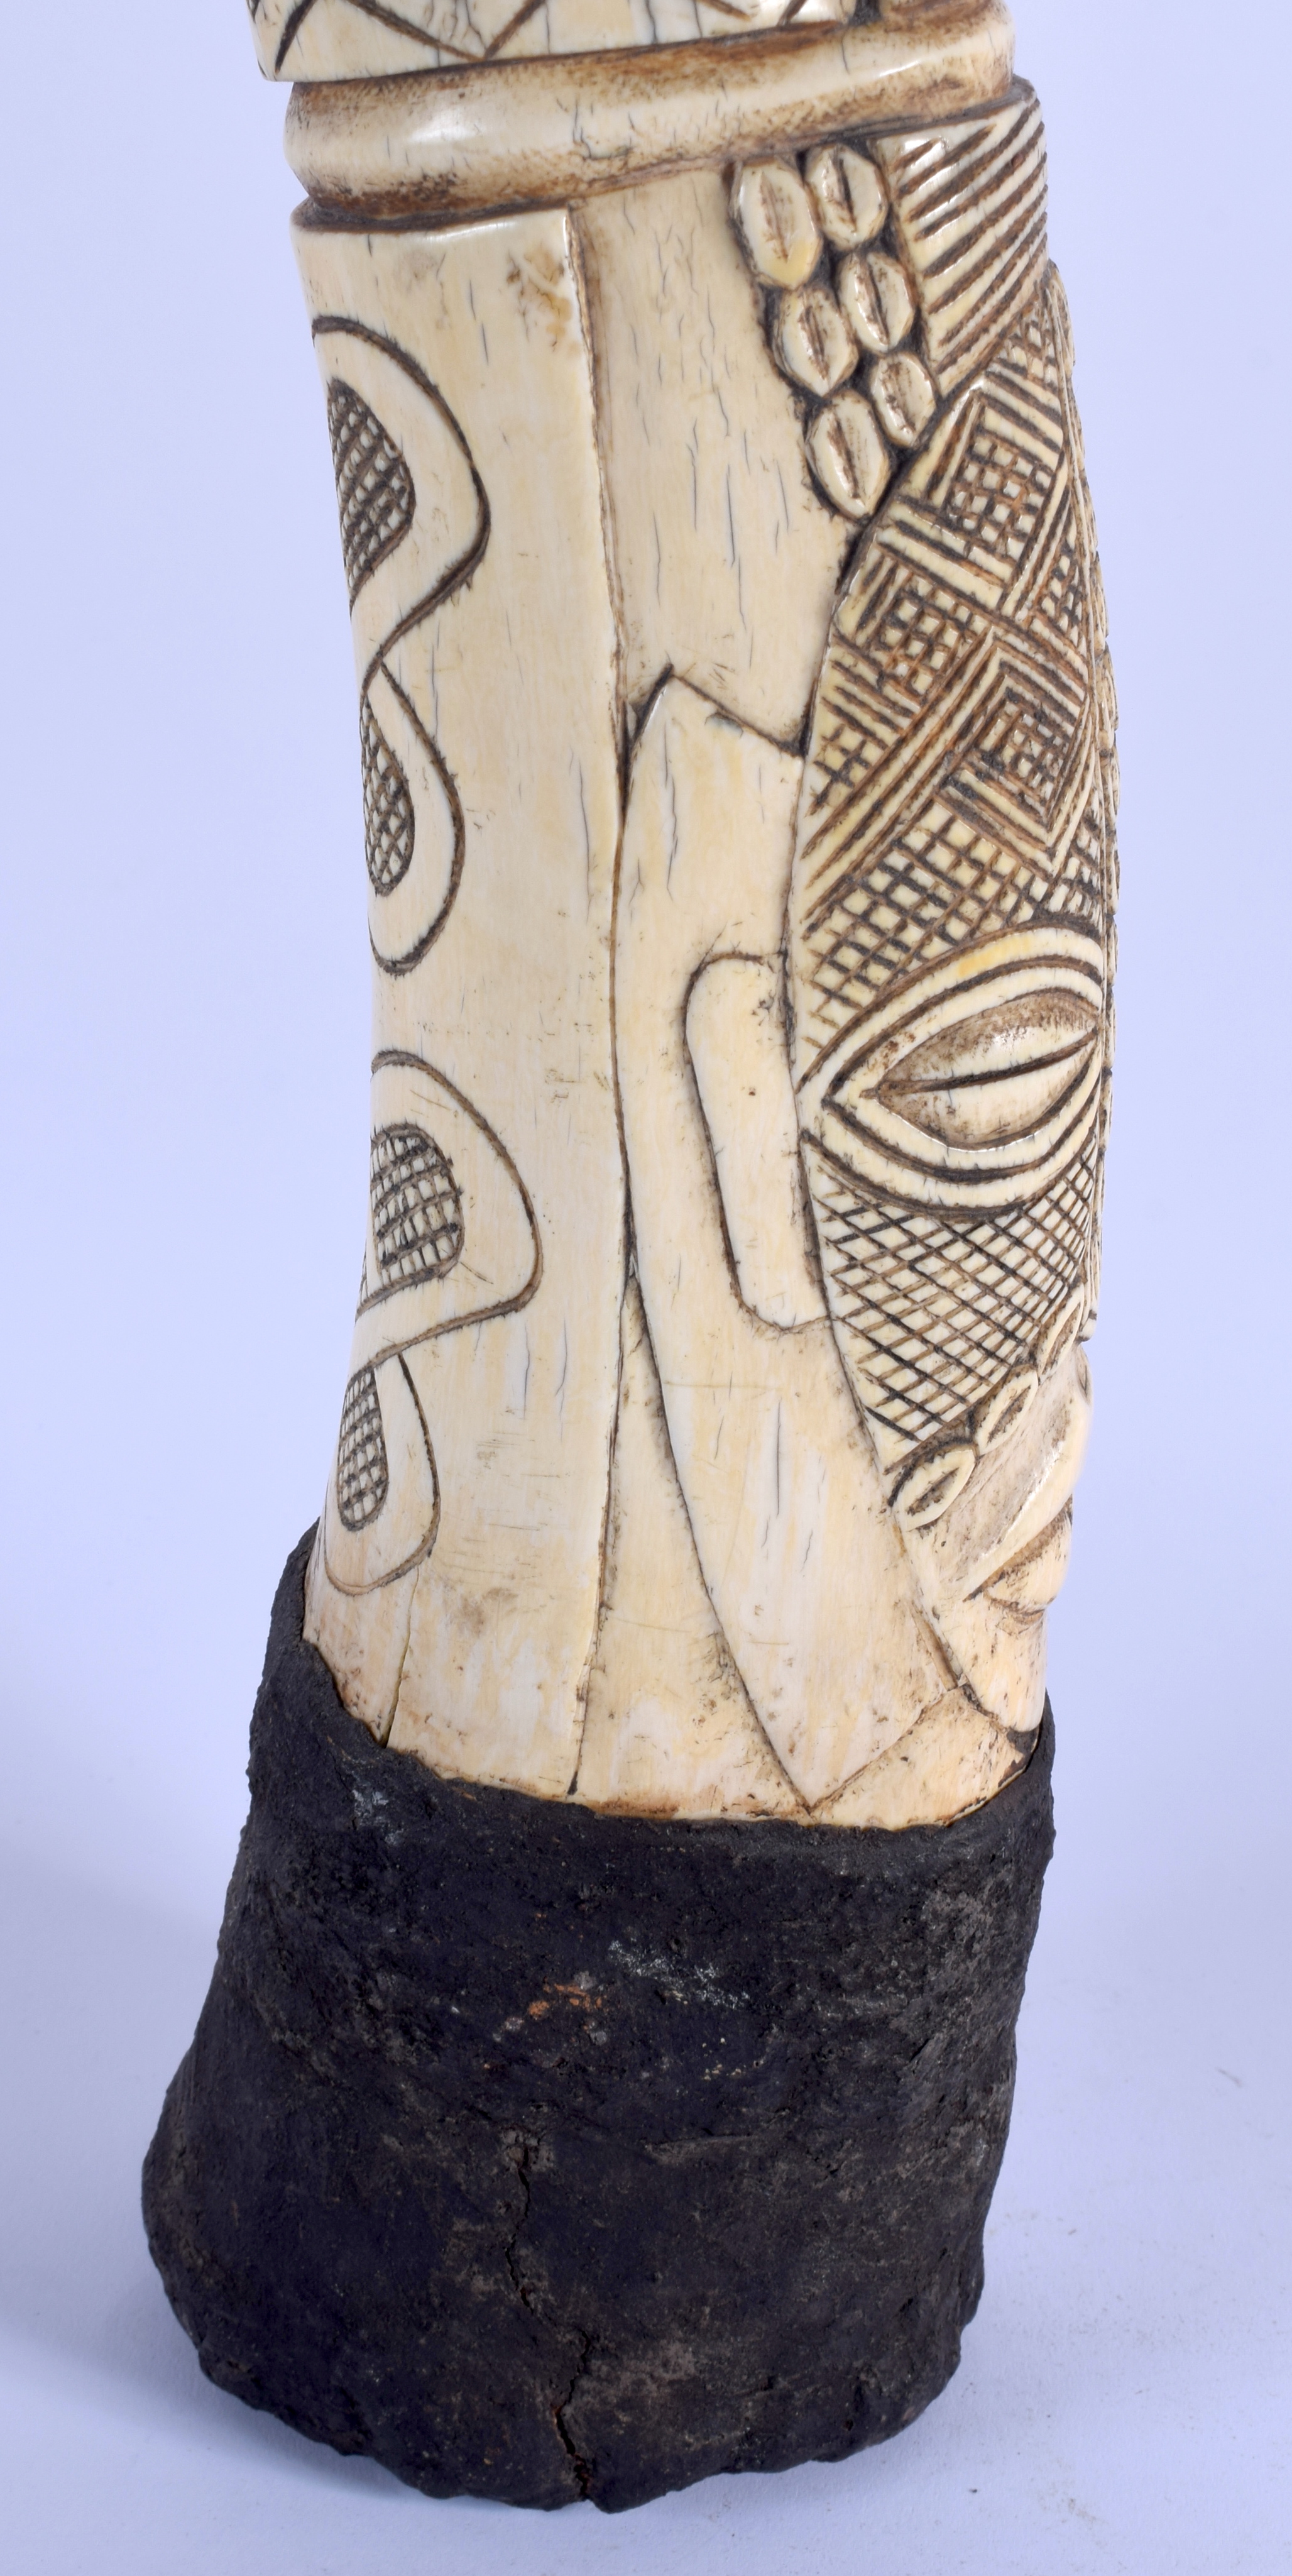 A VERY LARGE RARE 19TH CENTURY AFRICAN TRIBAL KUBA NDOP FIGURE possibly representing a portrait of K - Image 13 of 13